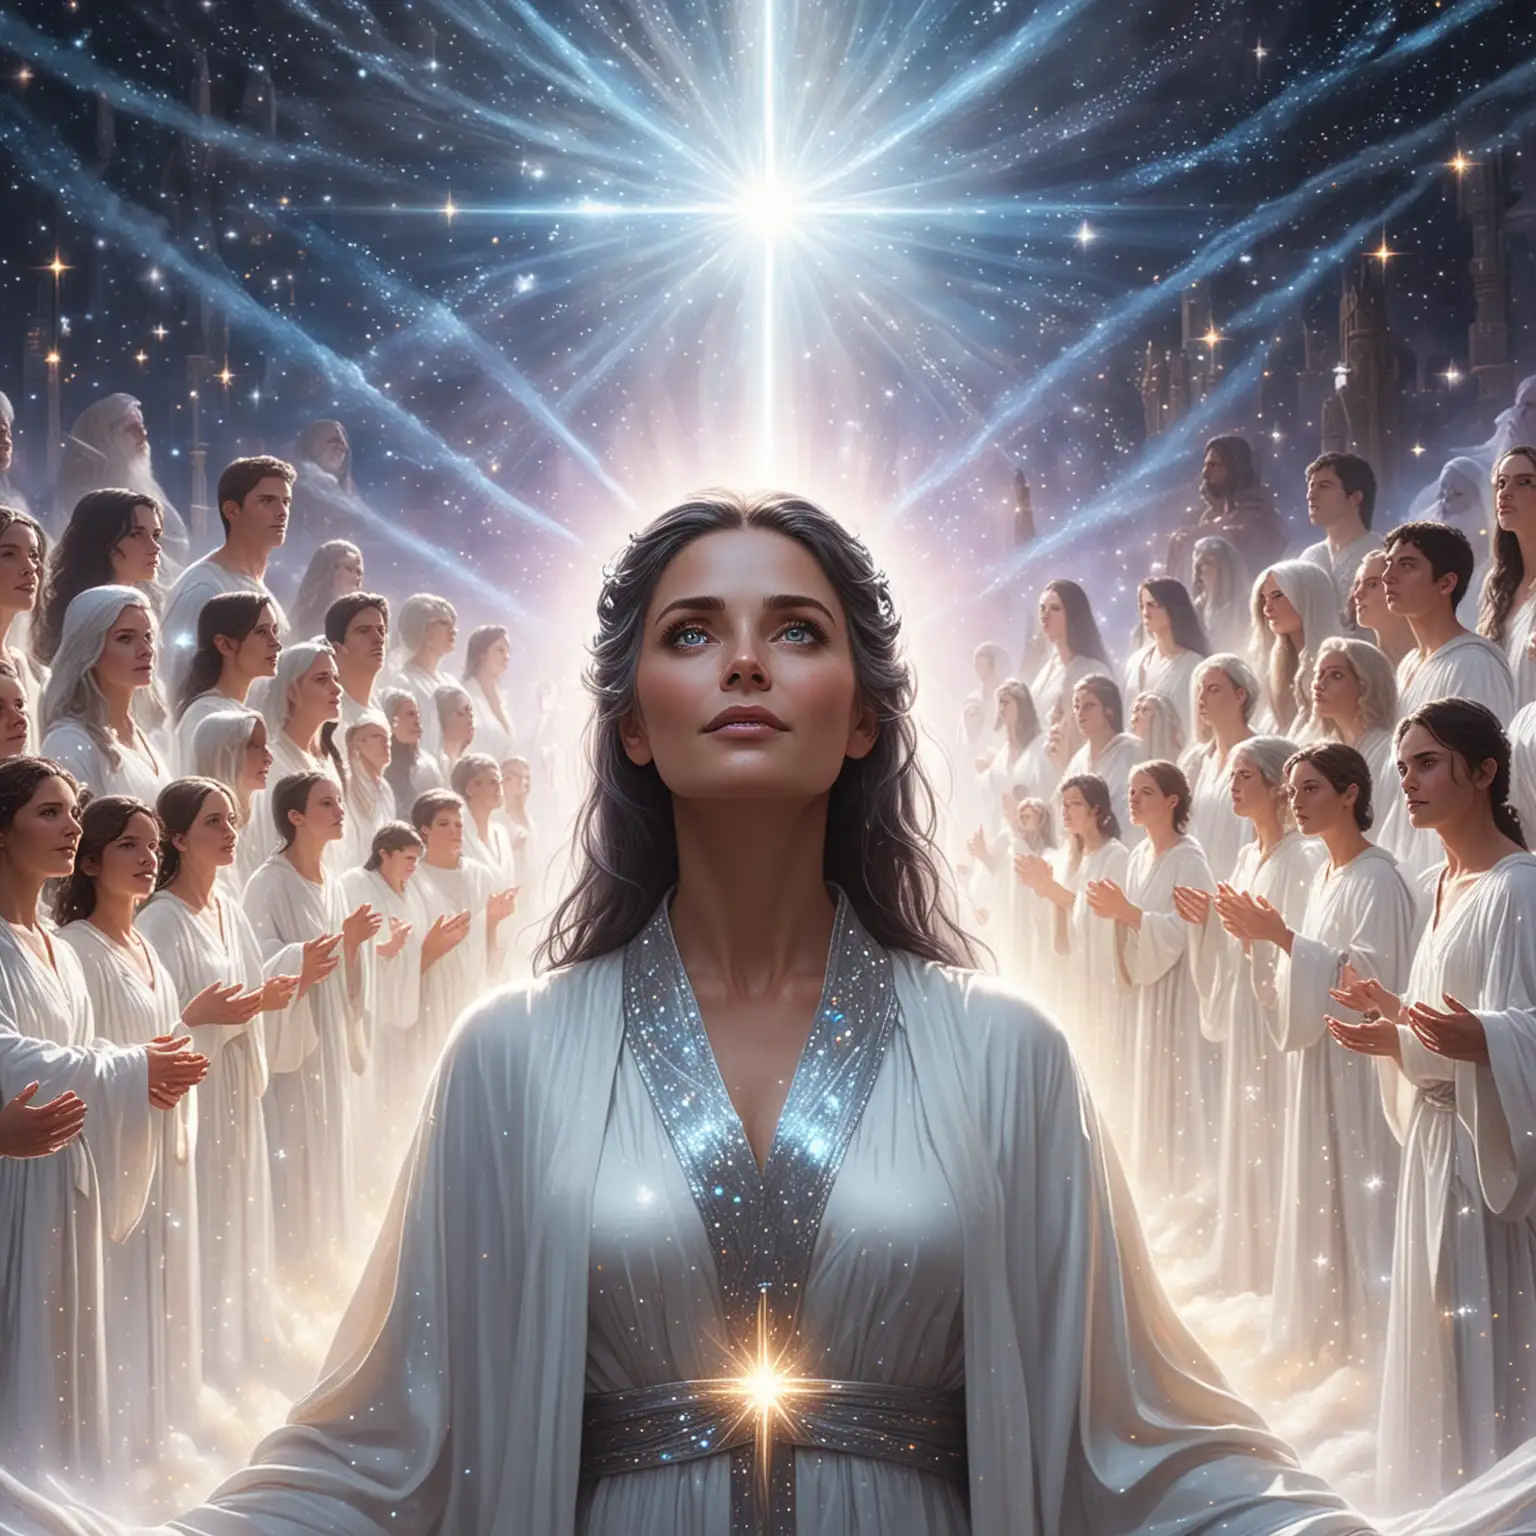 Galactic Elderly Woman in Luminous White Robes Surrounded by Iridescent Attired People